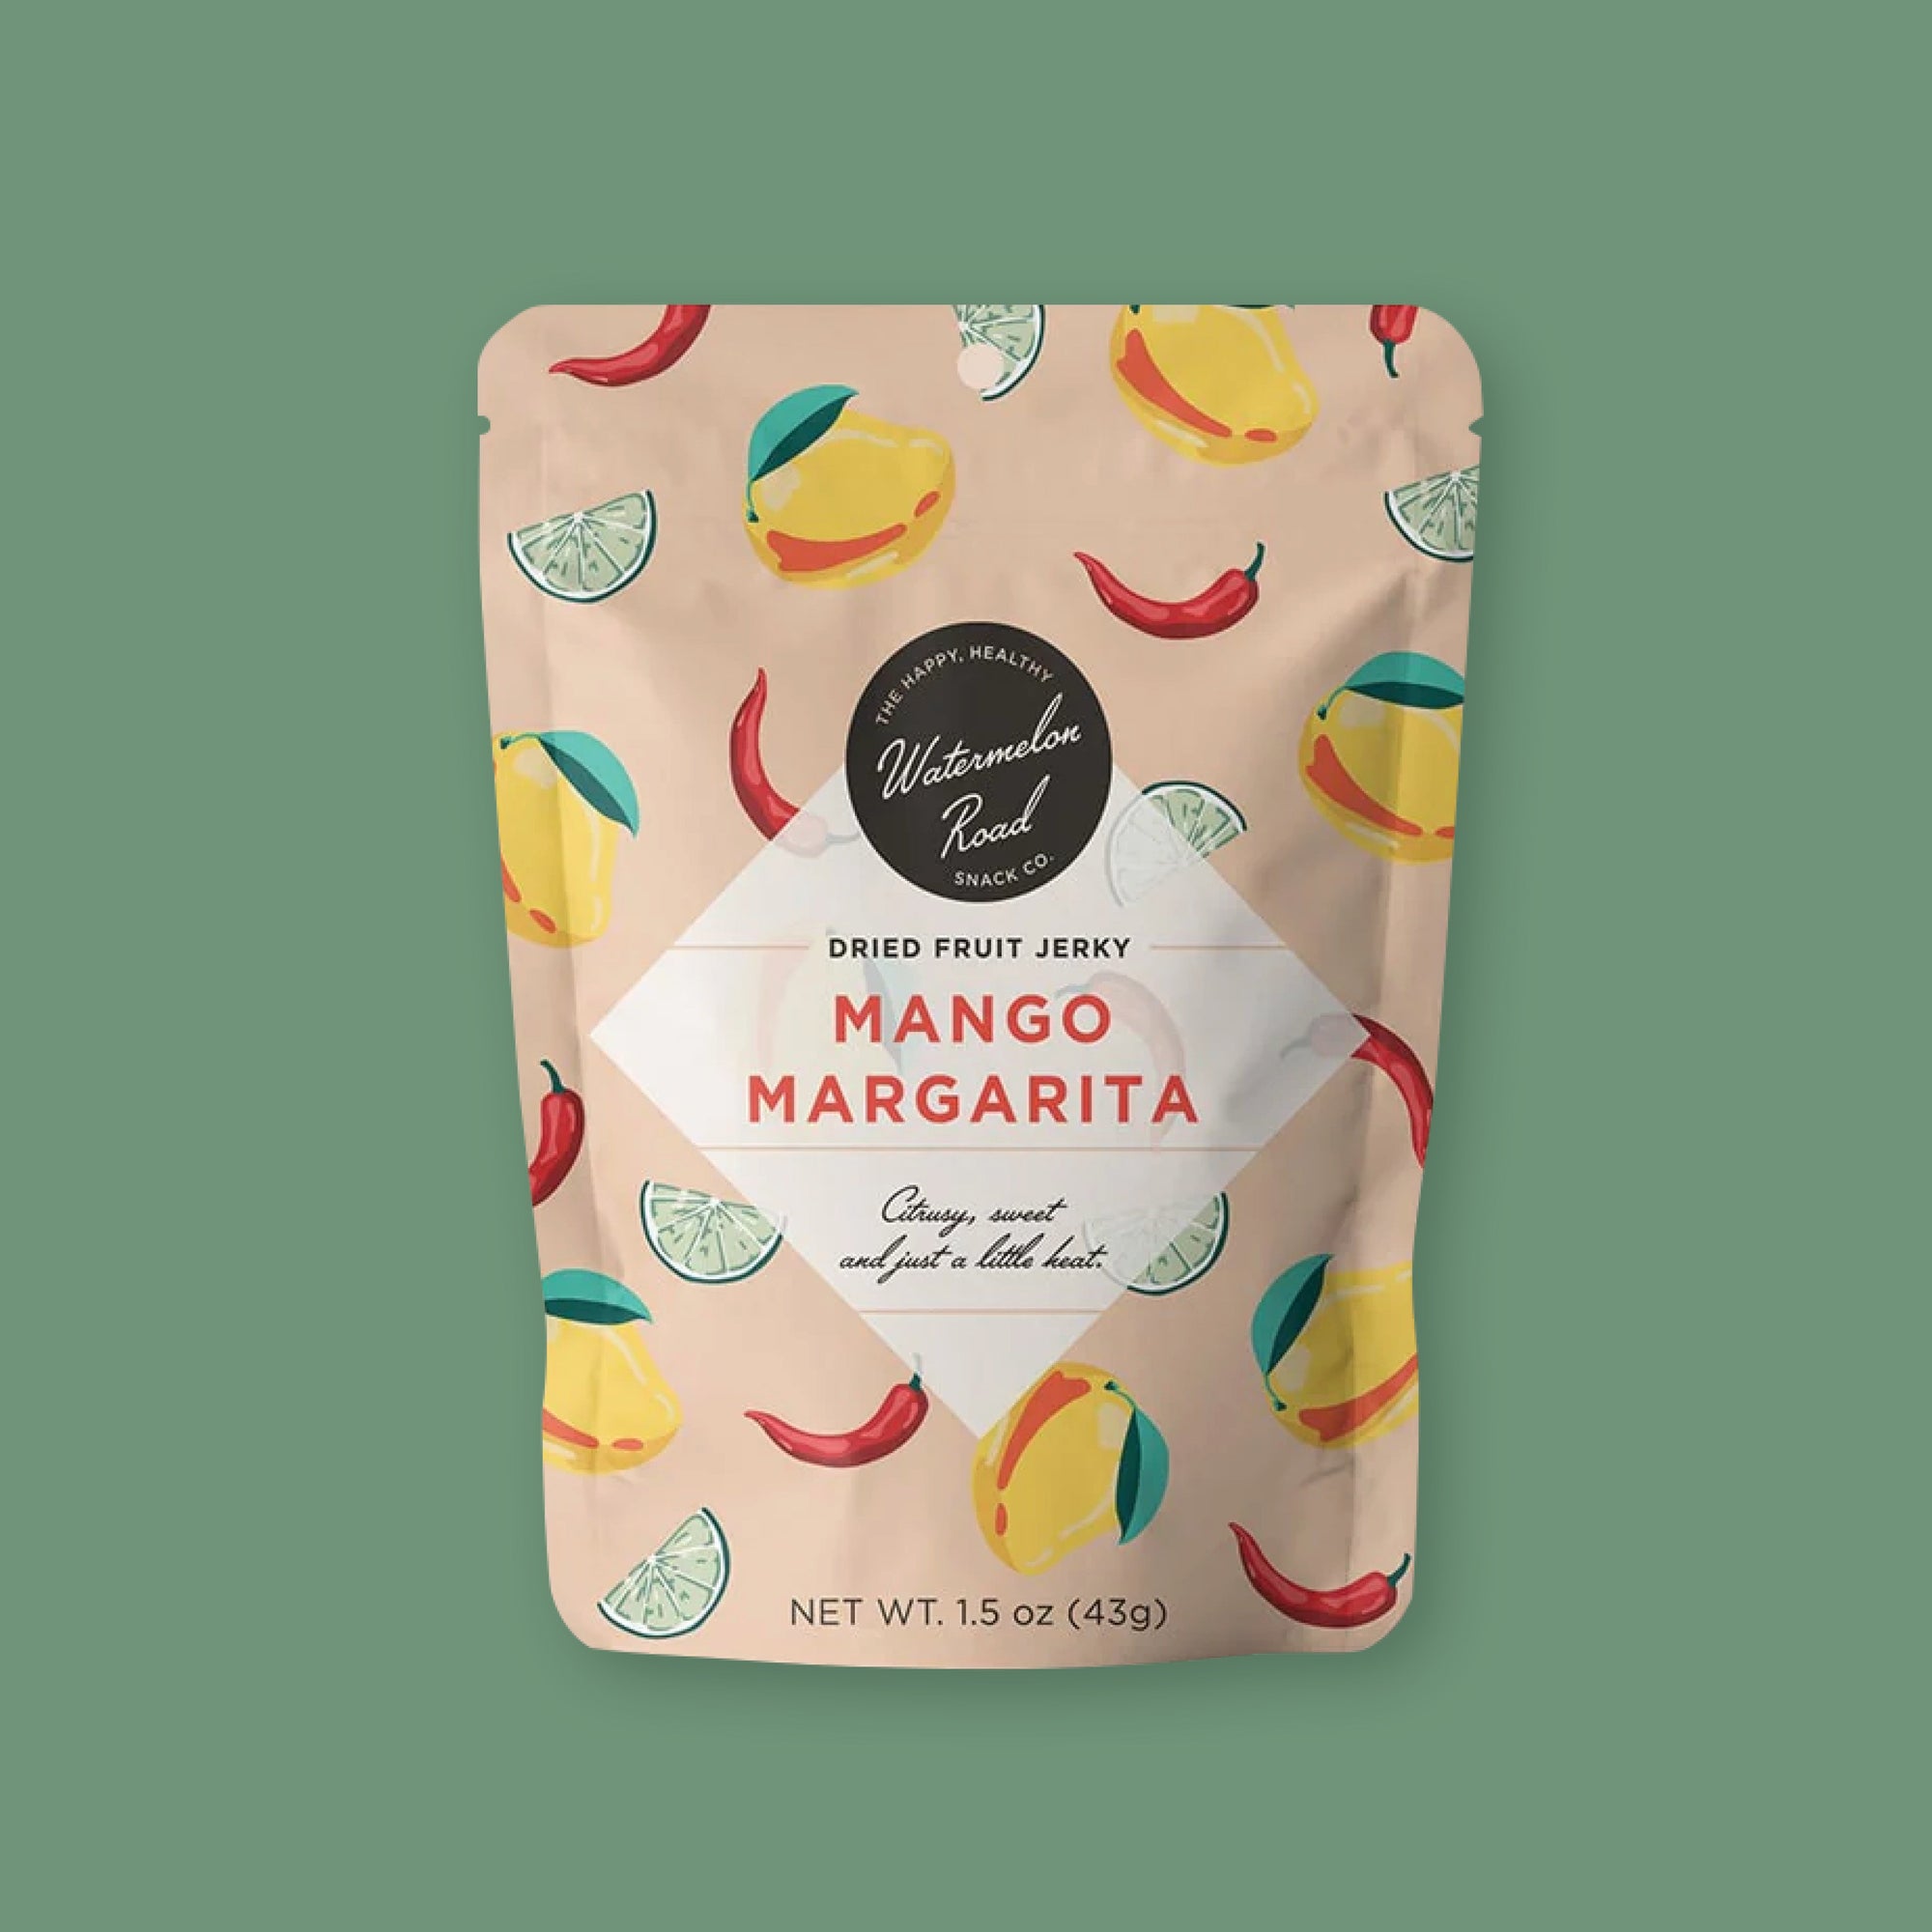 On a seafoam background sits a package. The peach package is Watermelon Road Snack Co. Mango Margarita Dried Fruit Jerky. It is "Citrusy, sweet and just a little heat." It has illustrations of limes, jalapenos, and mangos all over the package. 1.5 oz (43g)